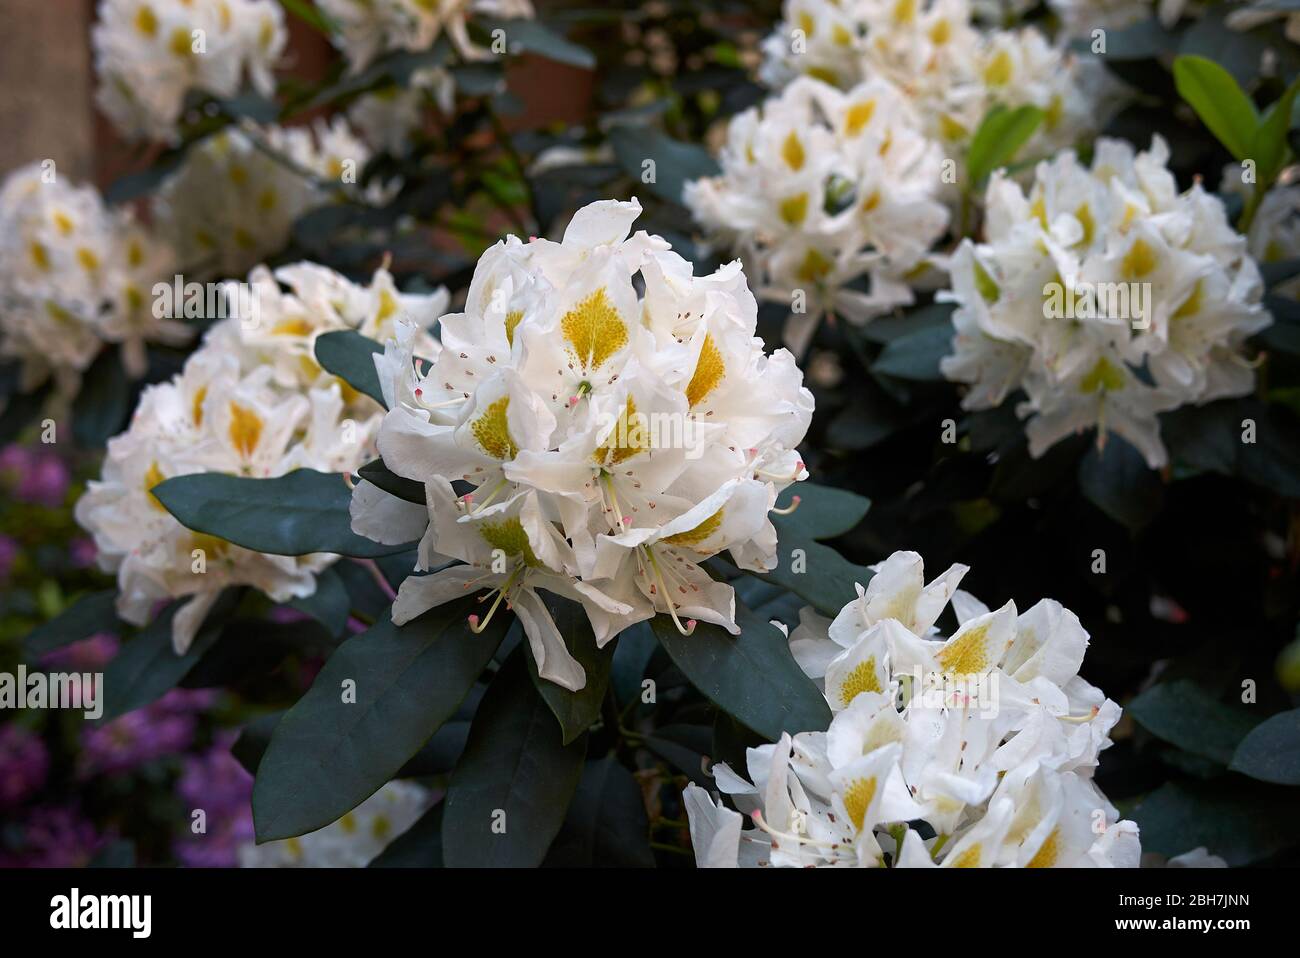 Rhododendron colorful flowers Stock Photo